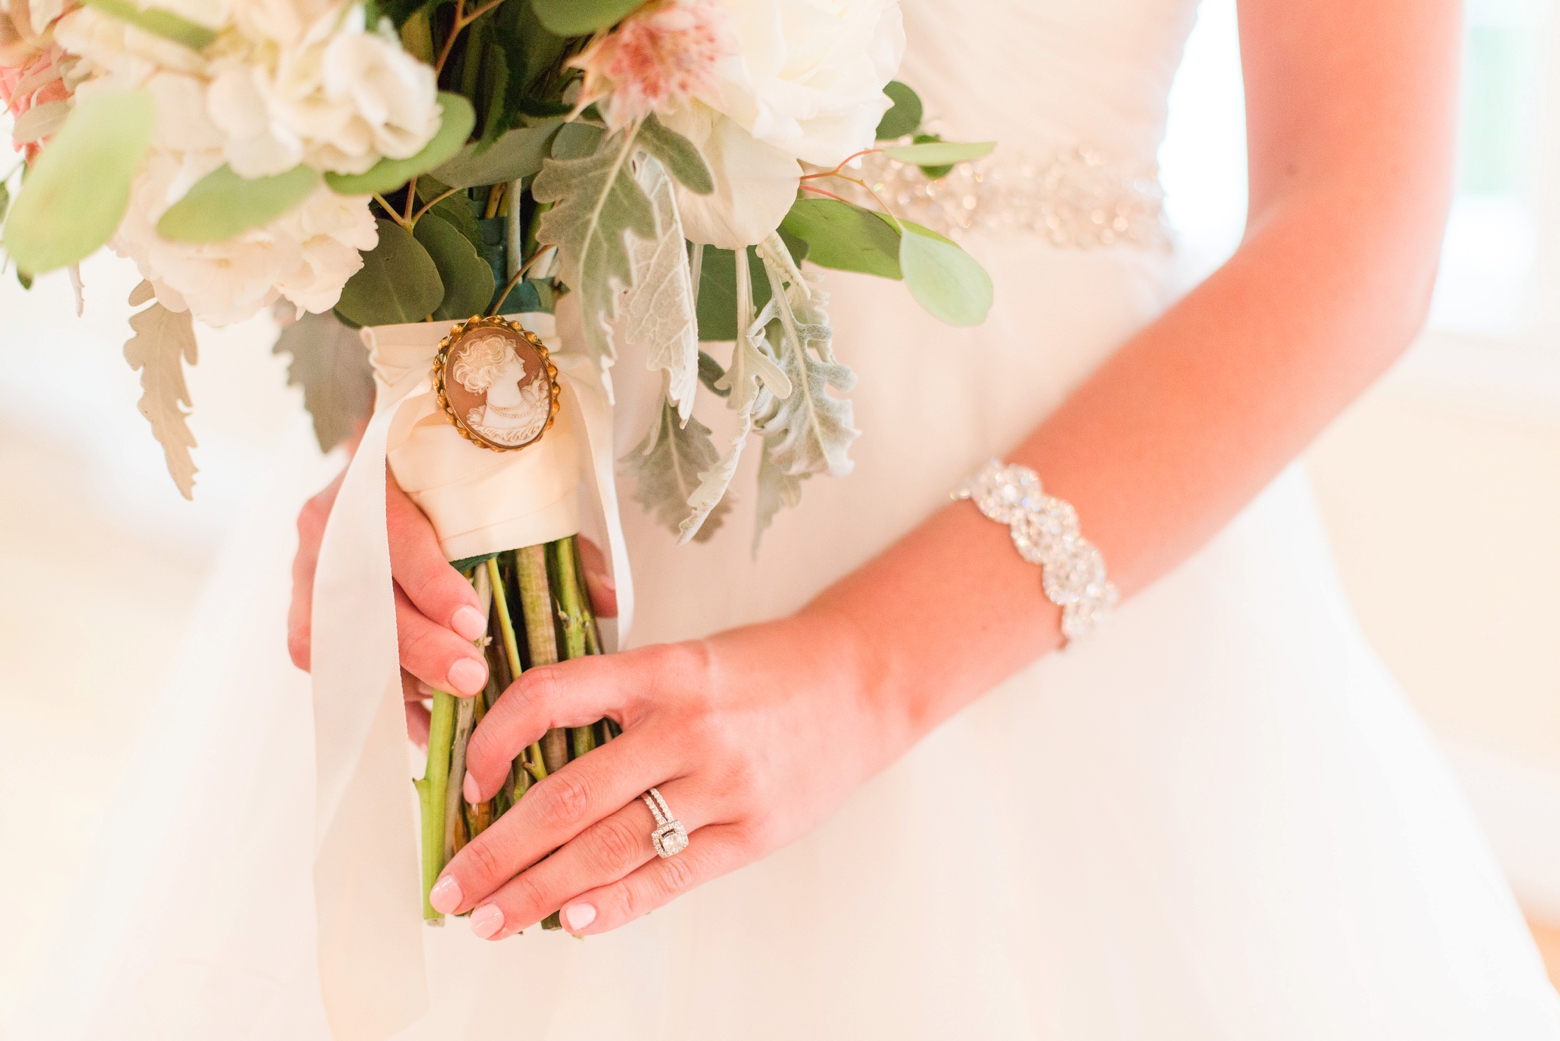 Woman's Club of Portsmouth Wedding by Angie McPherson Photography